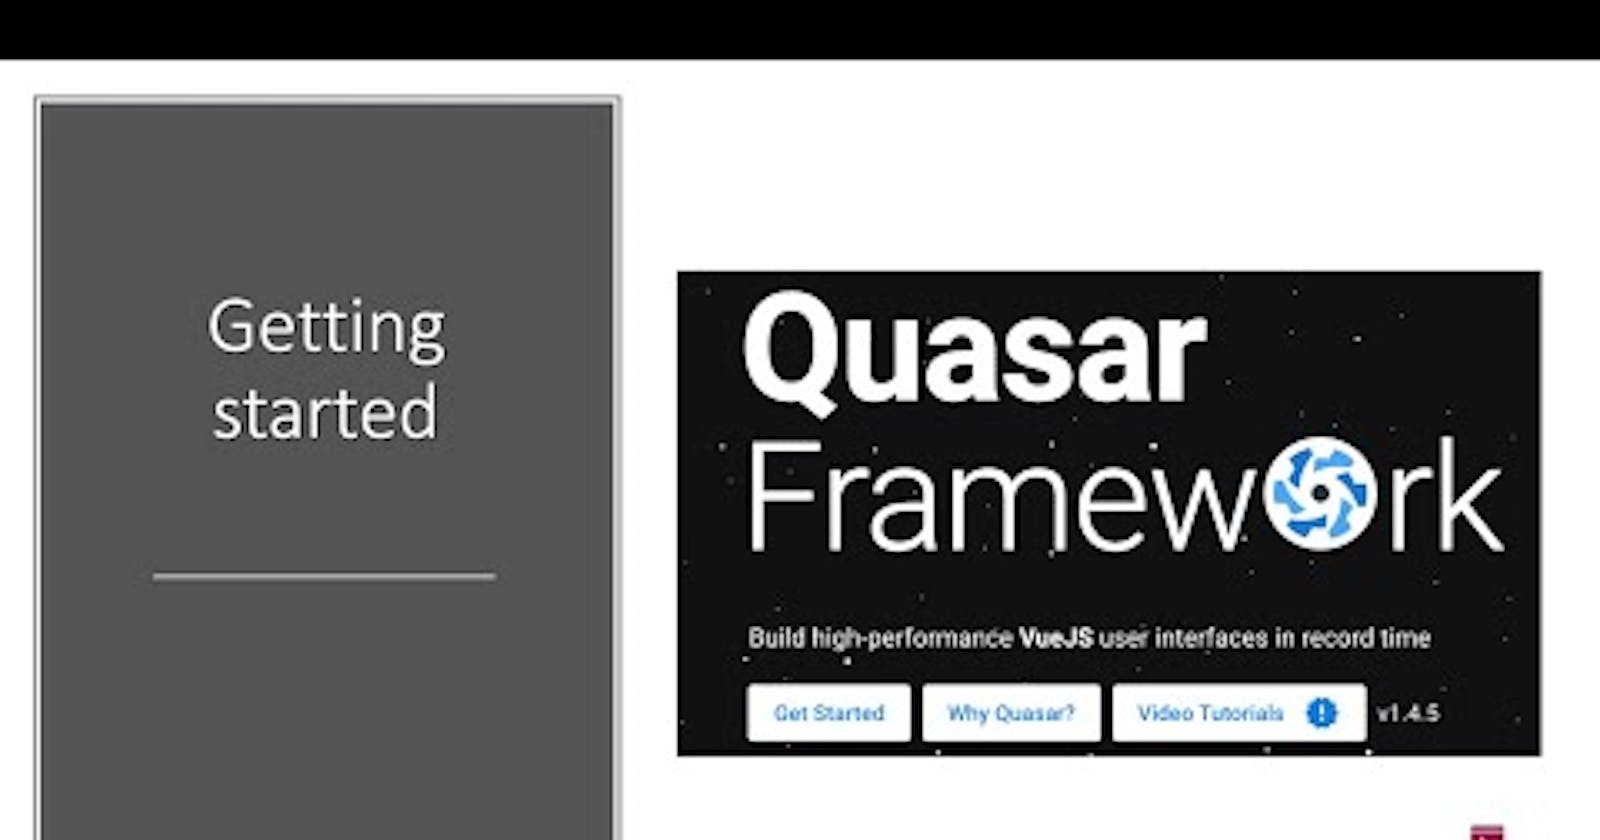 Getting started with Quasar framework